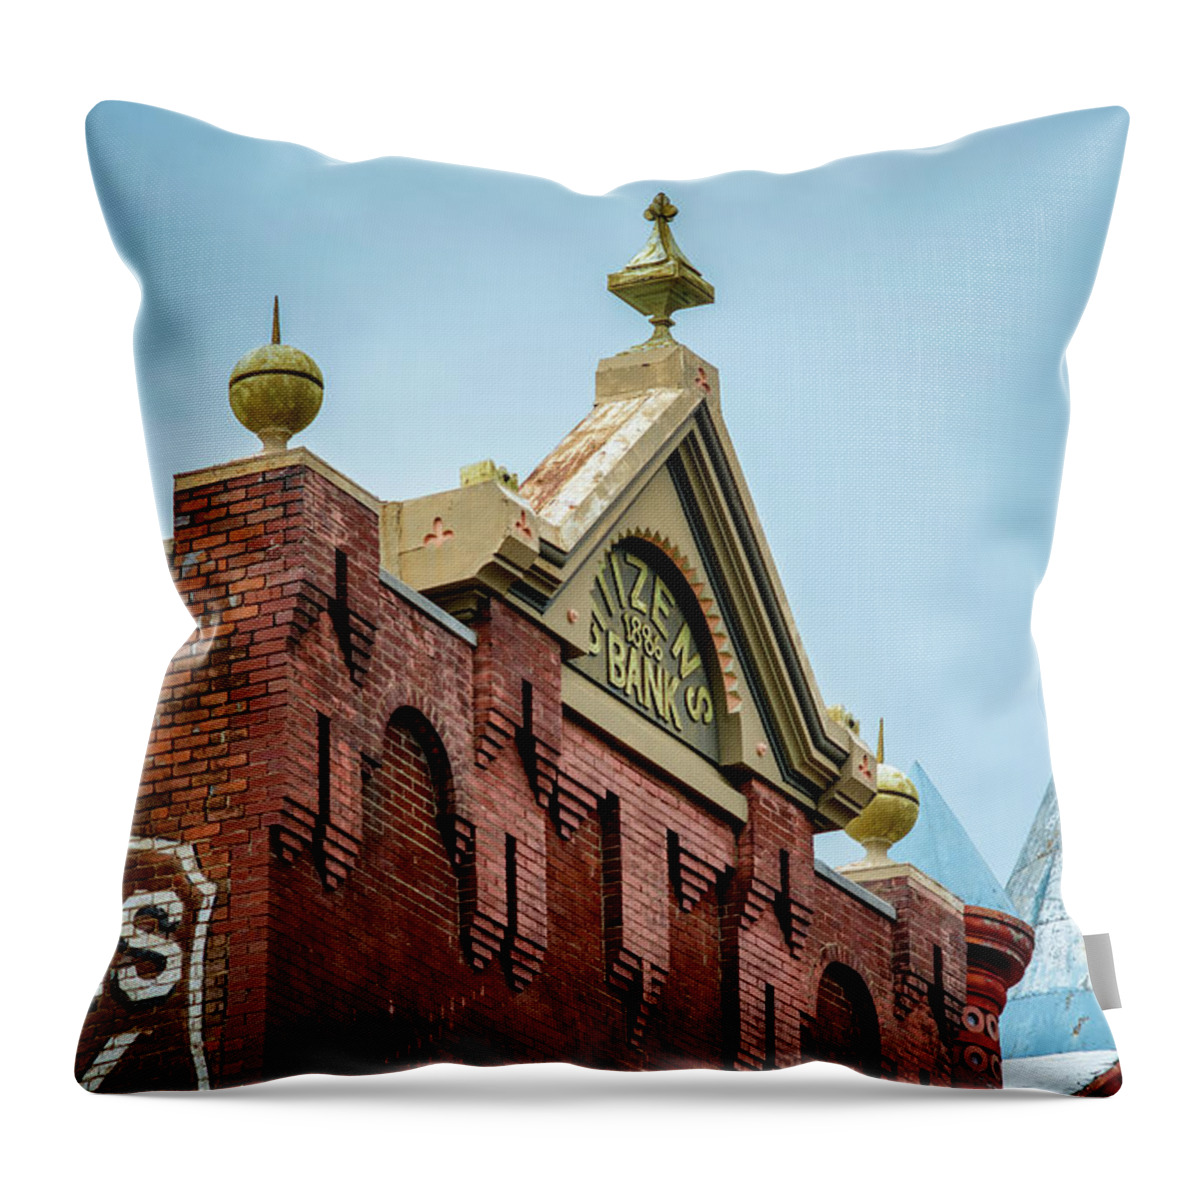 Victorian Throw Pillow featuring the photograph Fanciful Rooftops by James Barber